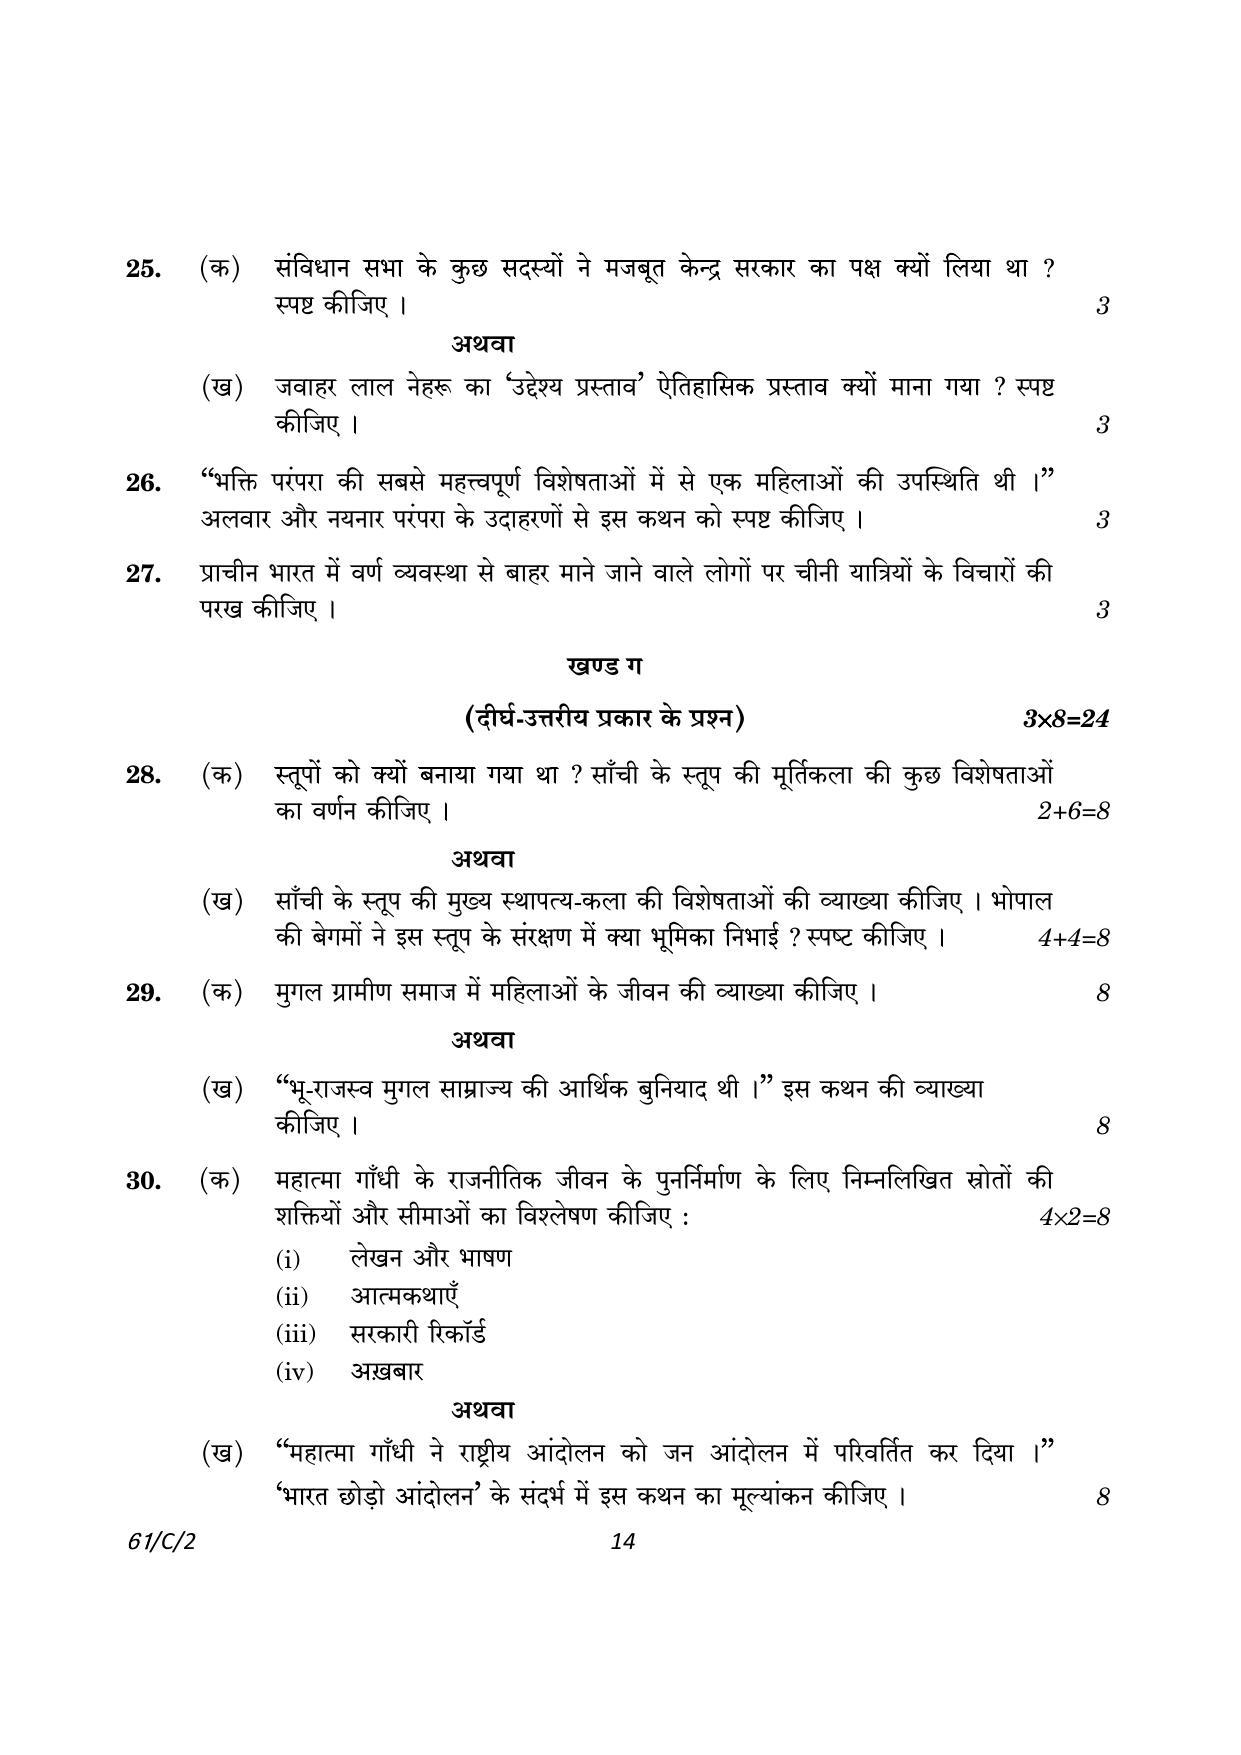 CBSE Class 12 61-2 History 2023 (Compartment) Question Paper - Page 14